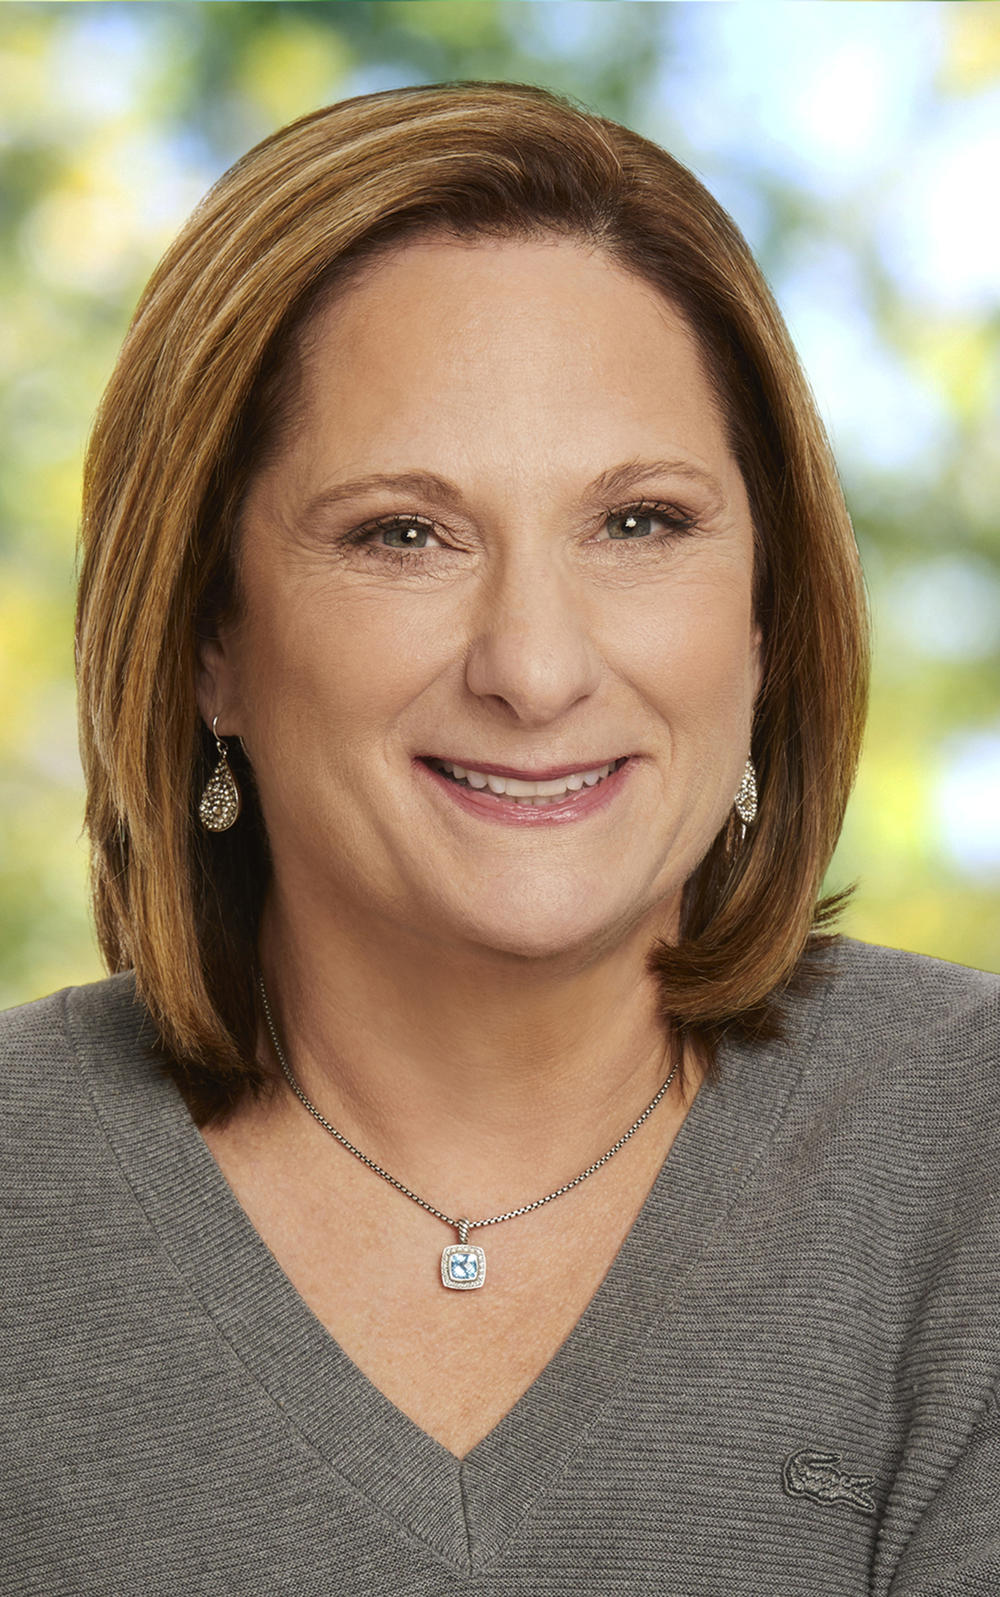 Susan E. Arnold is the new chairman of the board at the Walt Disney Company.